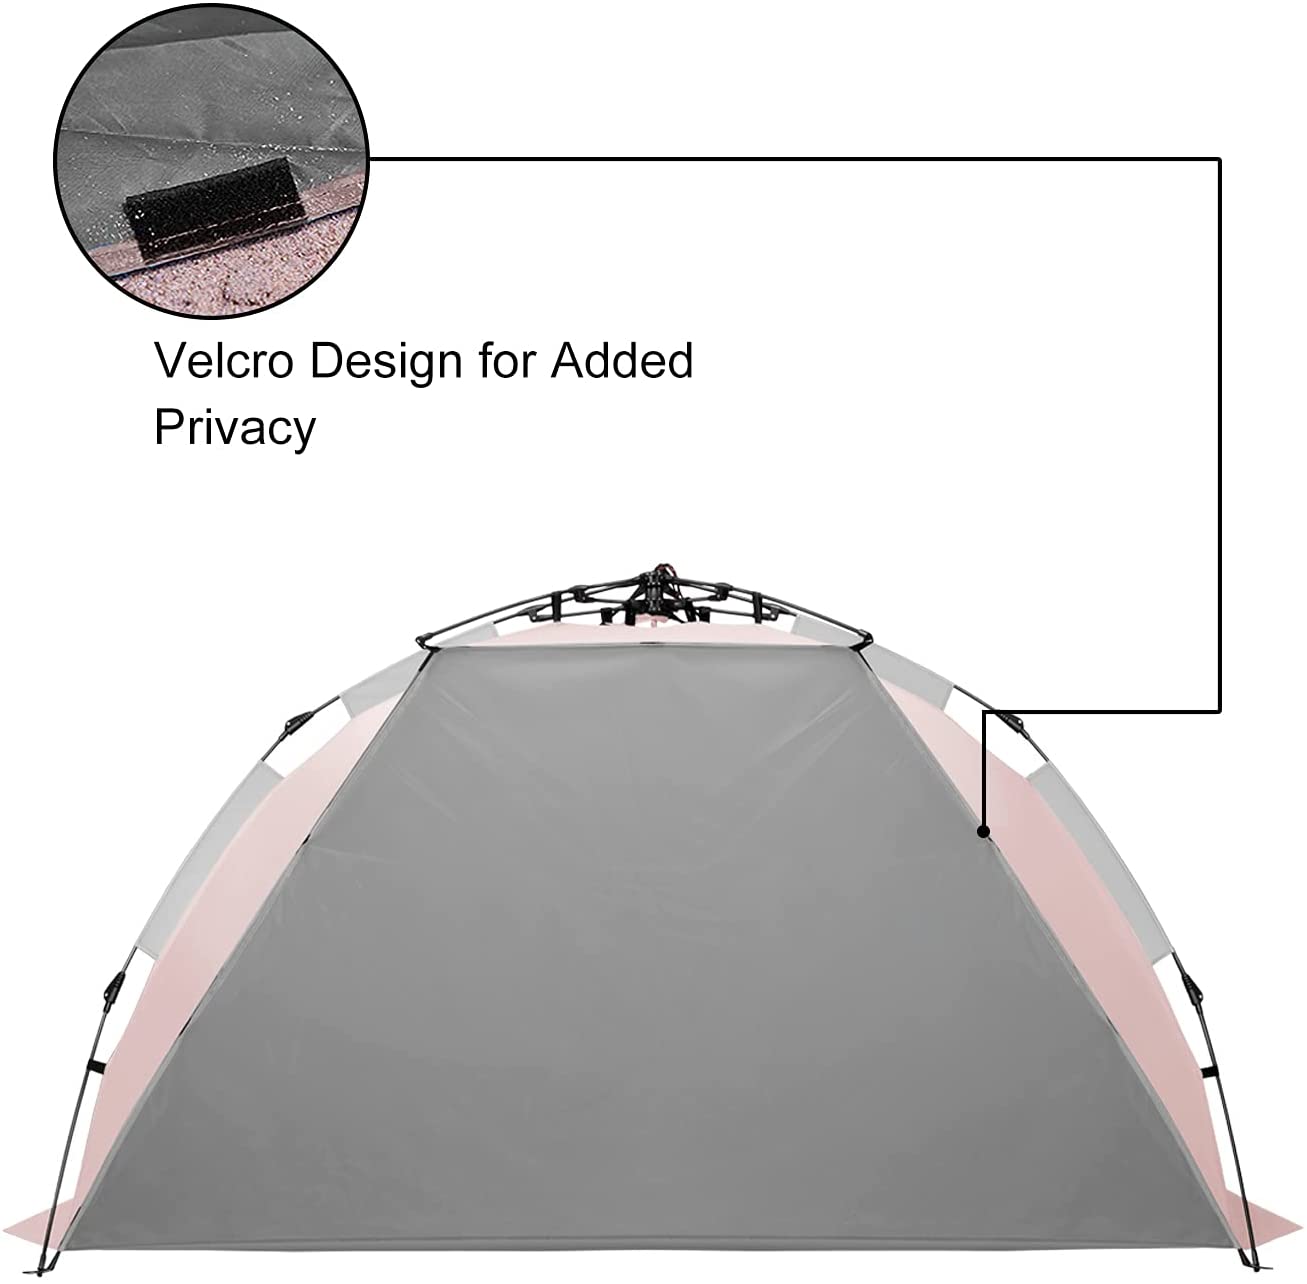 Oileus Beach Tent X-Large 4 Person Tent Sun Shelter, Portable Sun Shade, Pop Up Tents for Beach with Carry Bag, Stakes, 6 Sand Pockets, Anti UV for Fishing Hiking Camping, Waterproof, Windproof, Pink - image 2 of 7